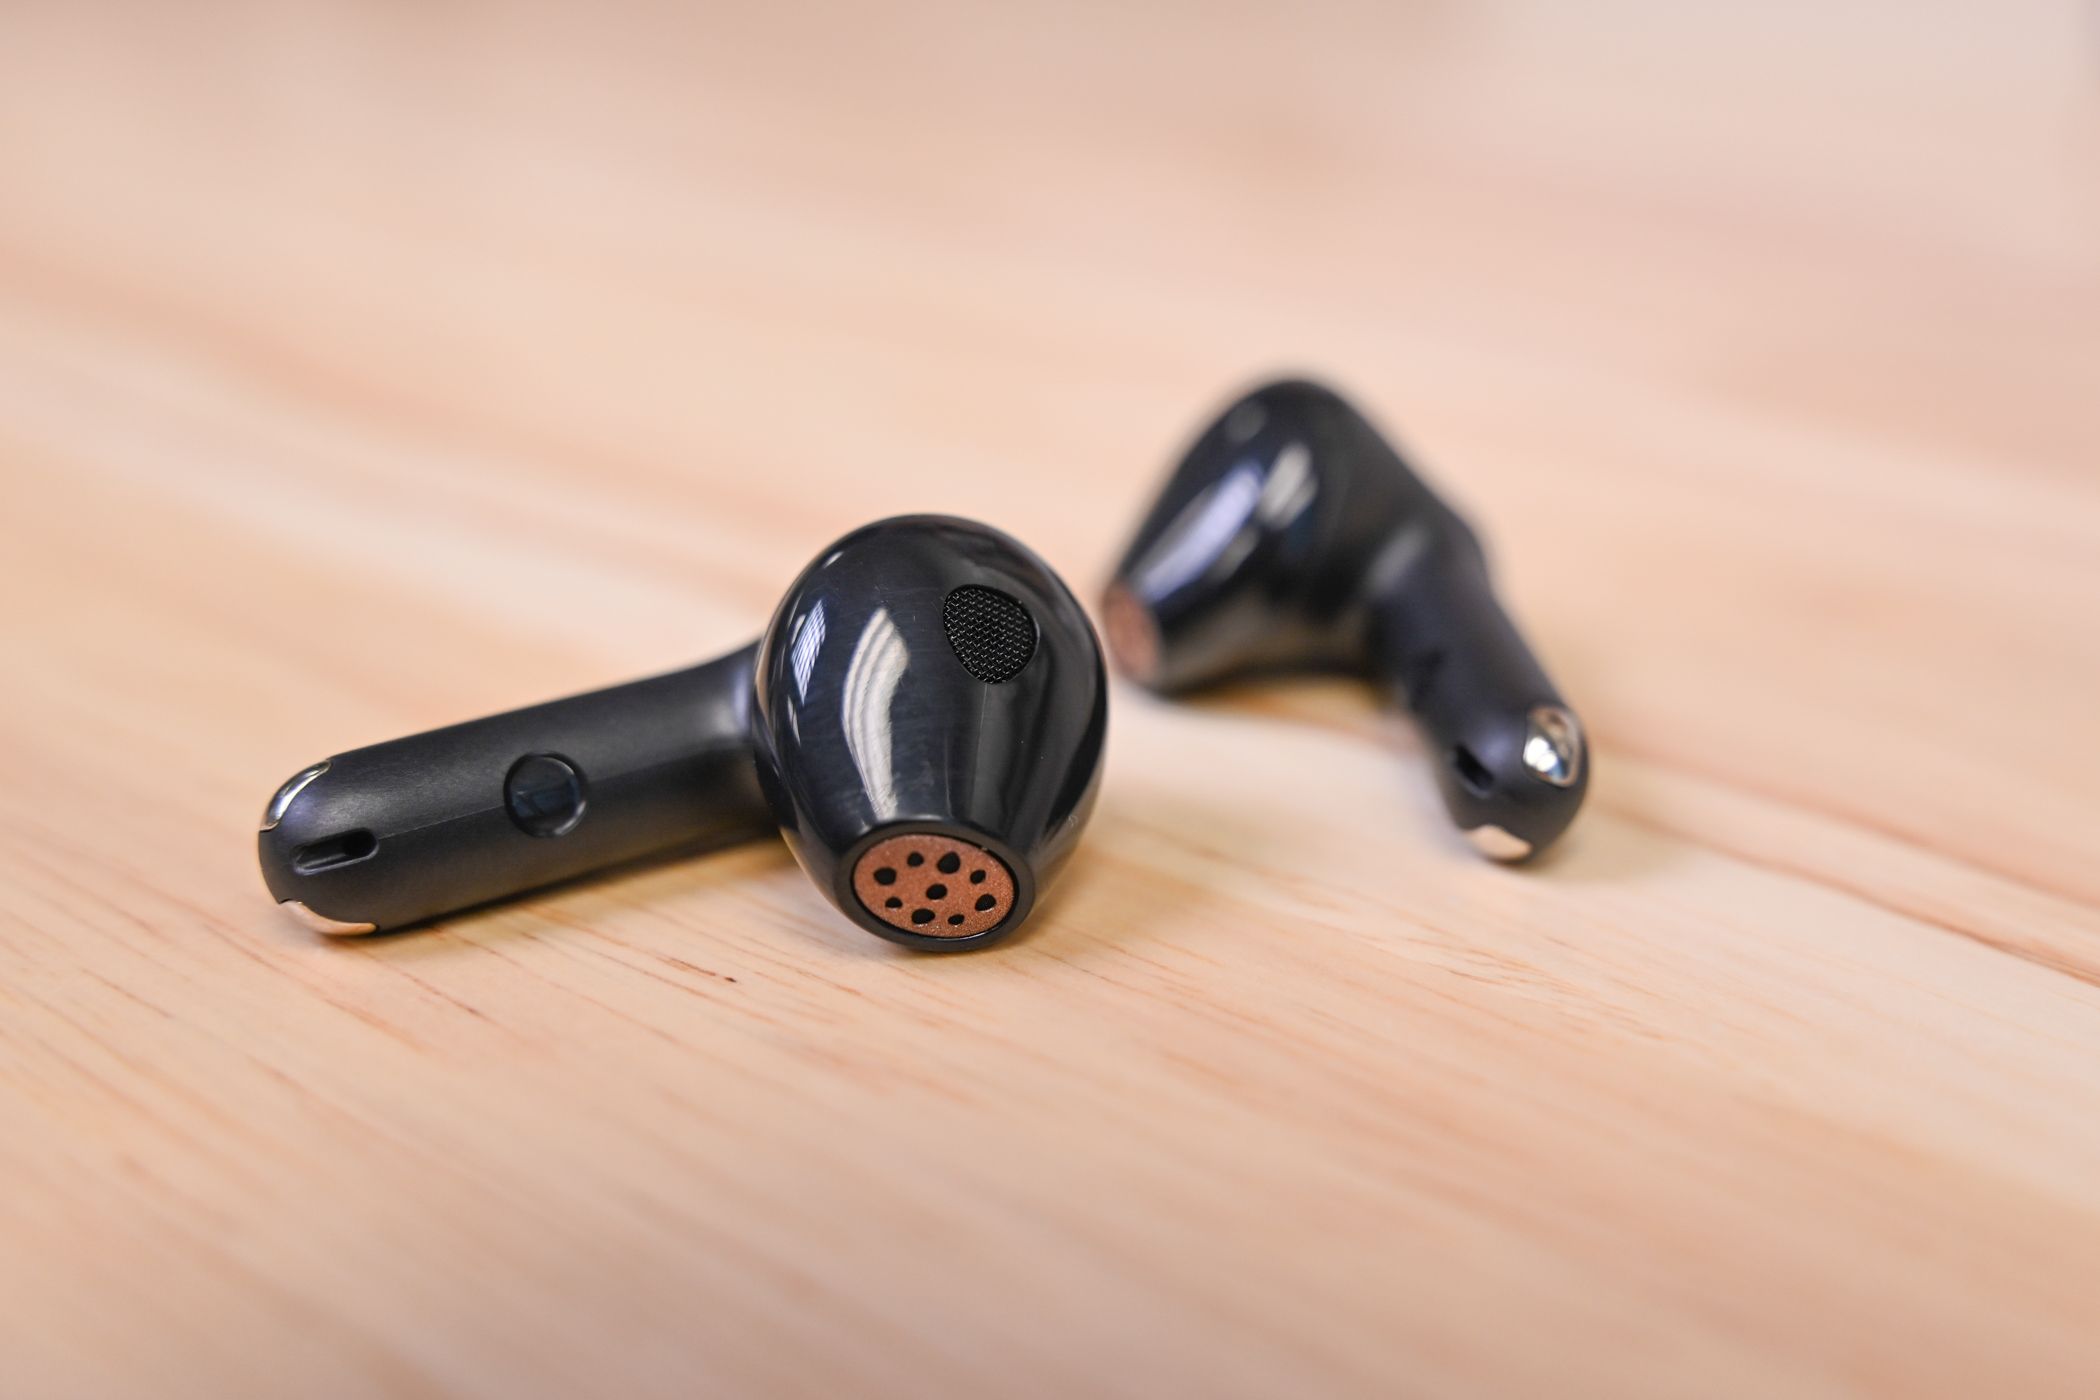 Alternate angle of the SOUNDPEATS Air4 aptX Lossless Wireless Earbuds laid on a wood desk